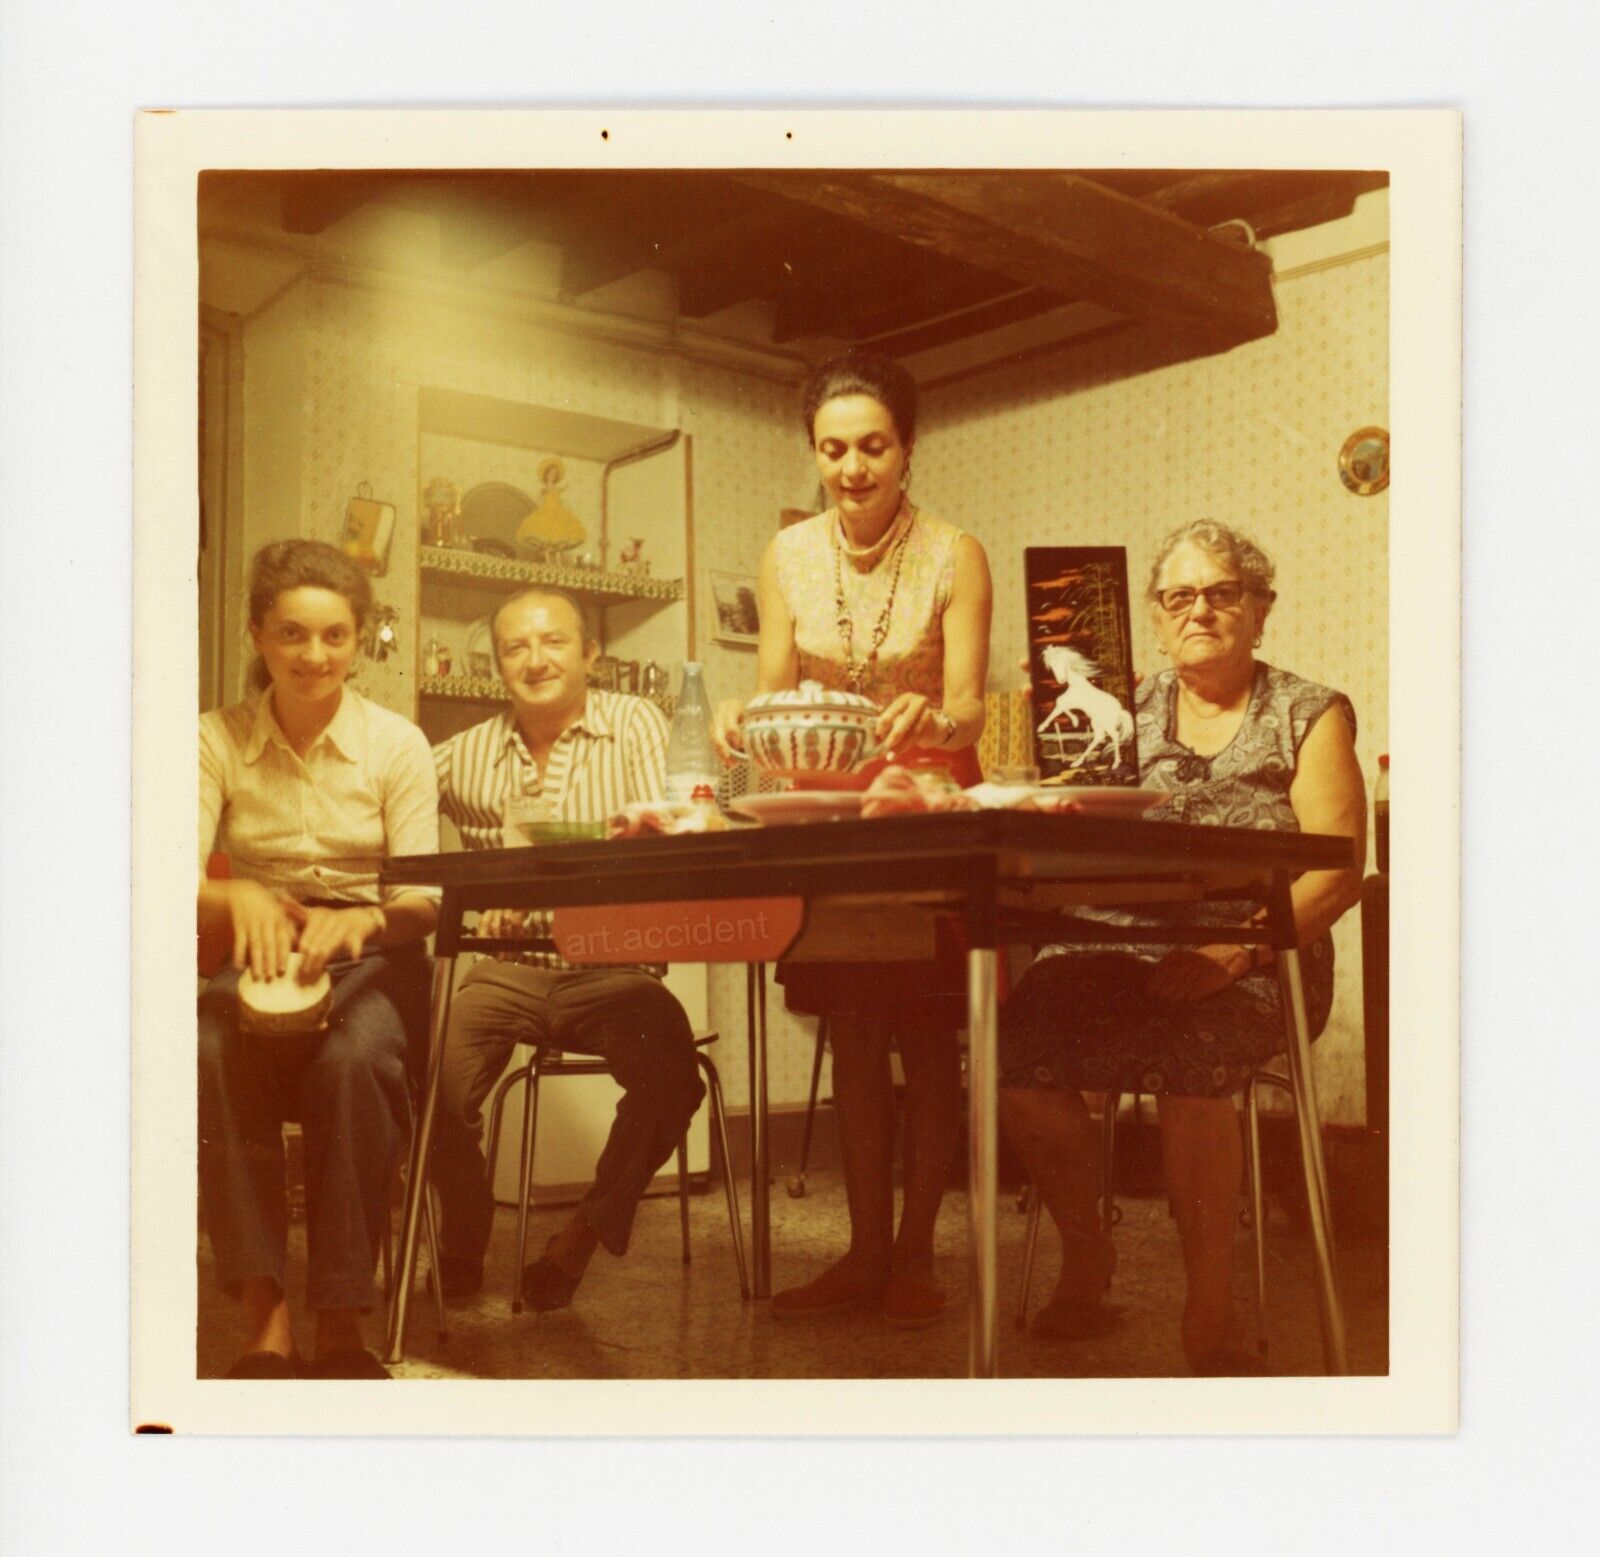 Snapshot - SOUP & FORMICA. Original Vintage Found Photo. 1972, Abstract, Funny.